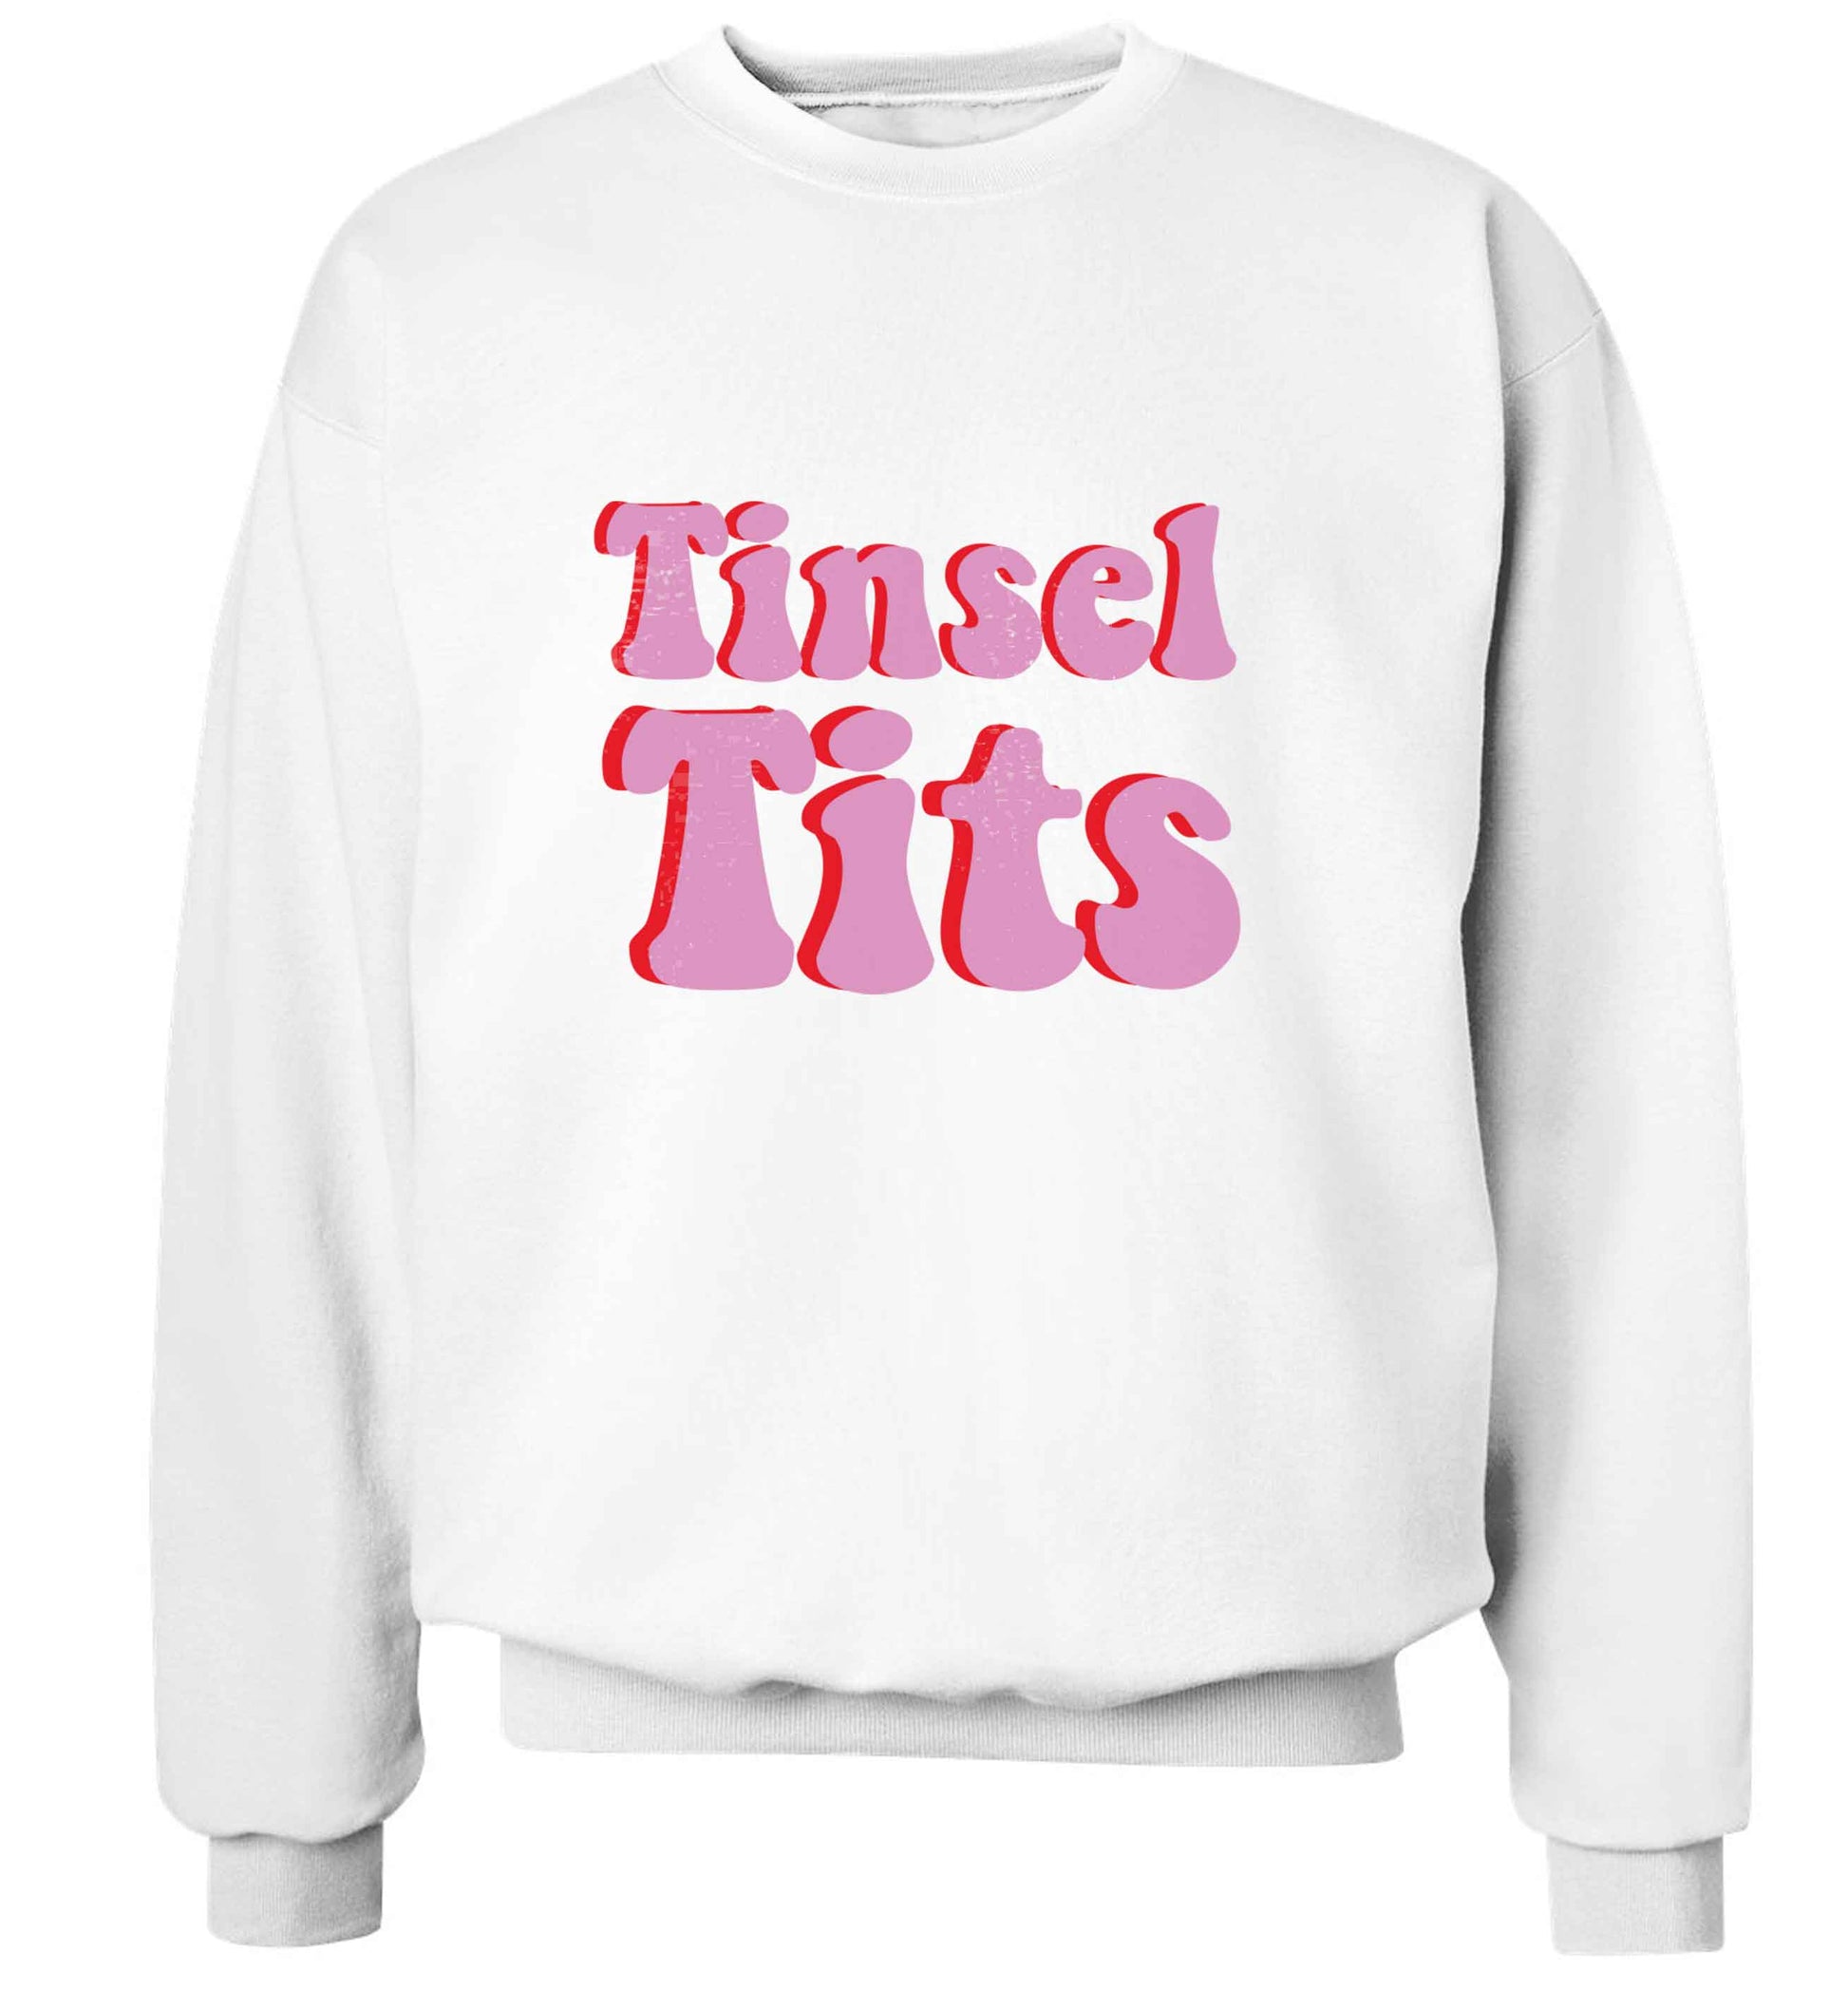 Tinsel tits adult's unisex white sweater 2XL